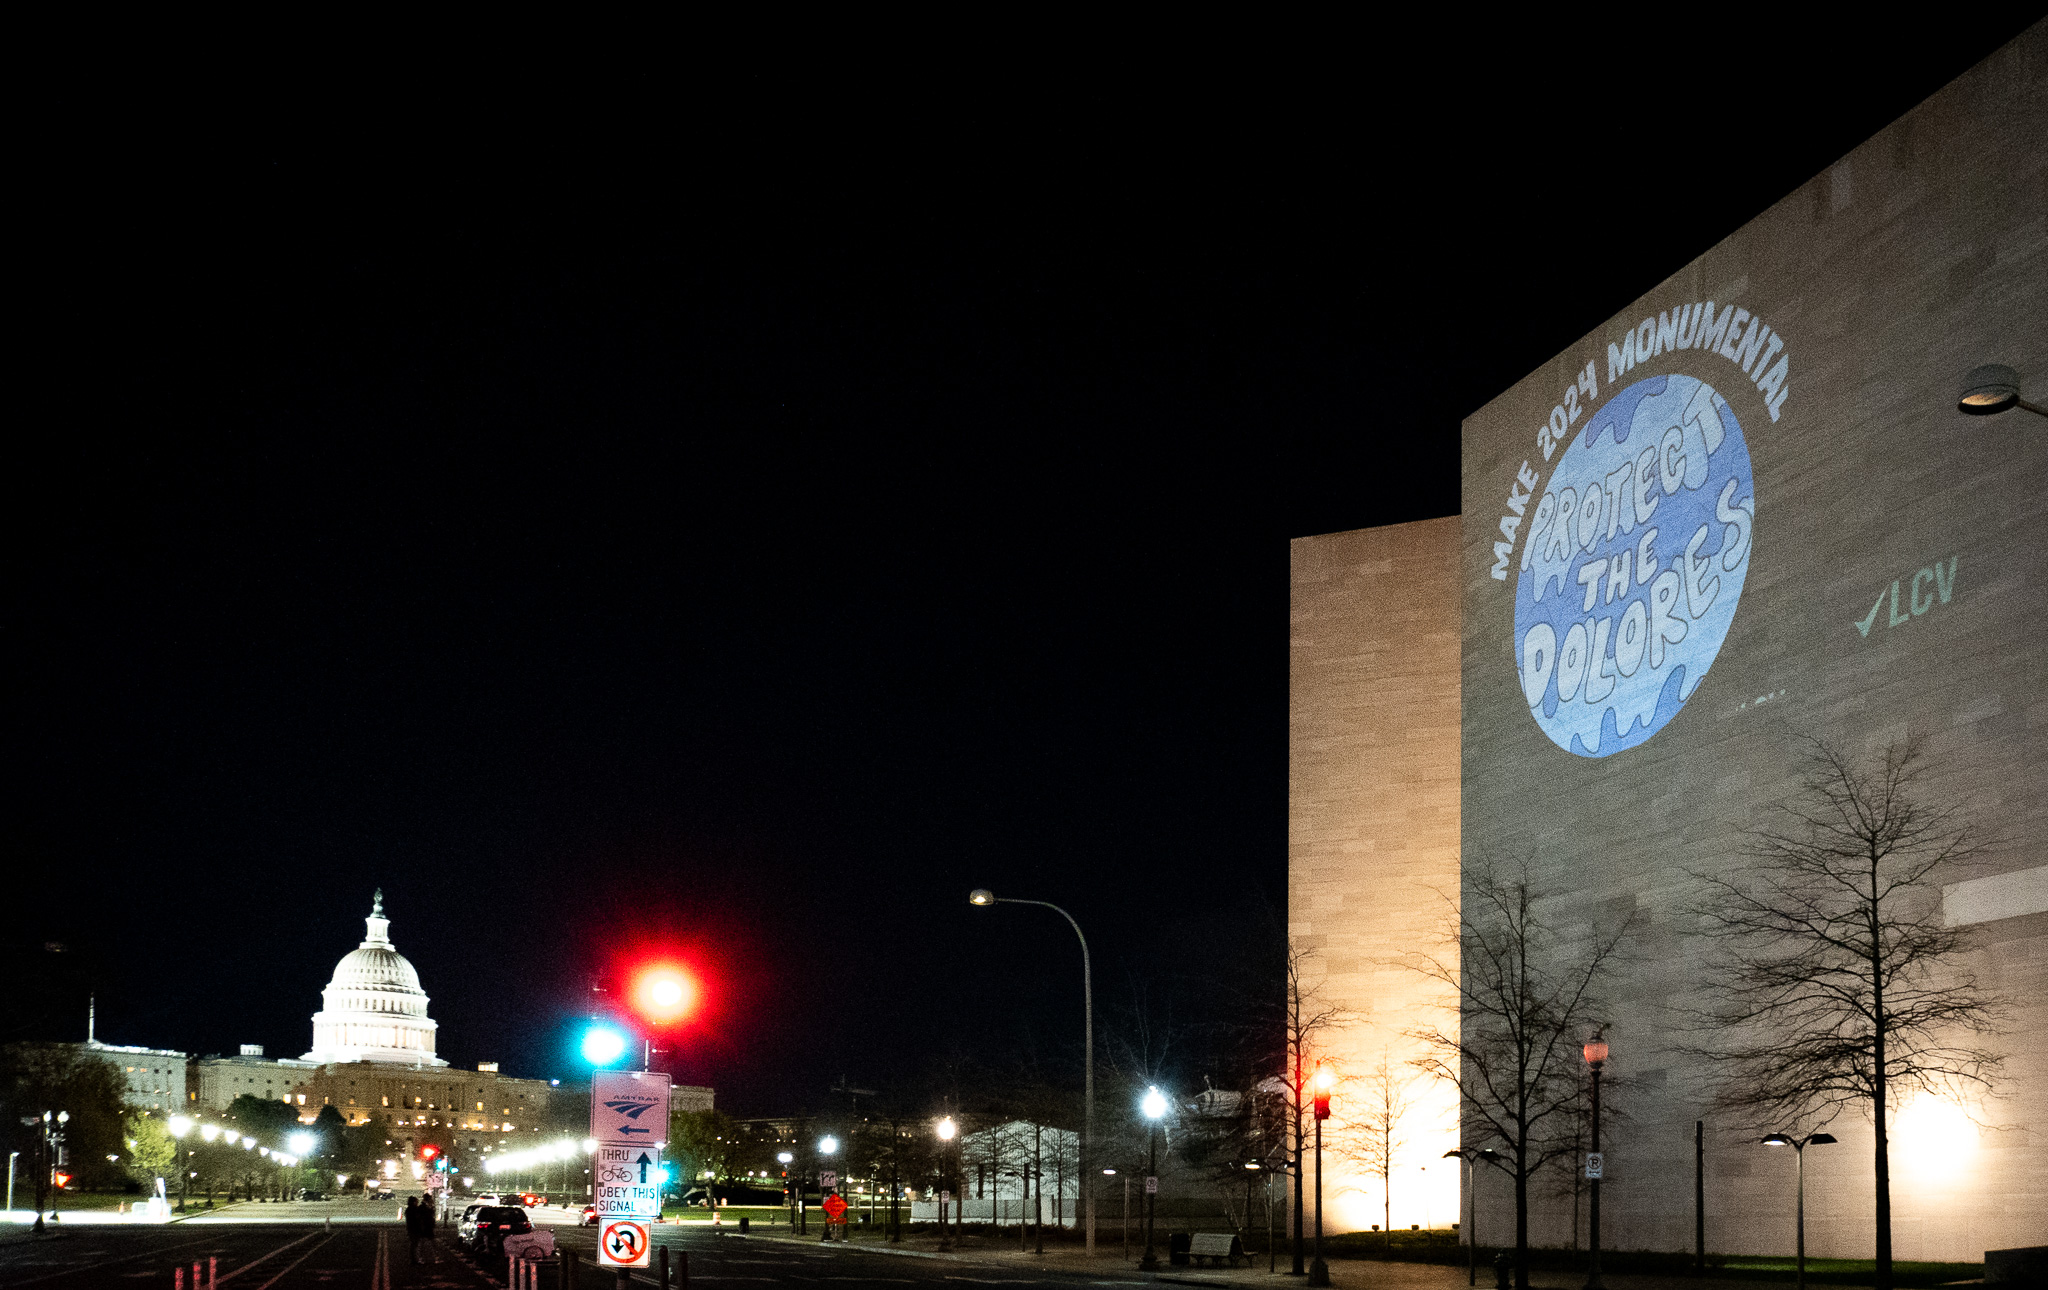 Department of Interior building at night with a light projection on the wall reading "Make 2024 Monumental, Protect the Dolores" and the Capitol in the background.